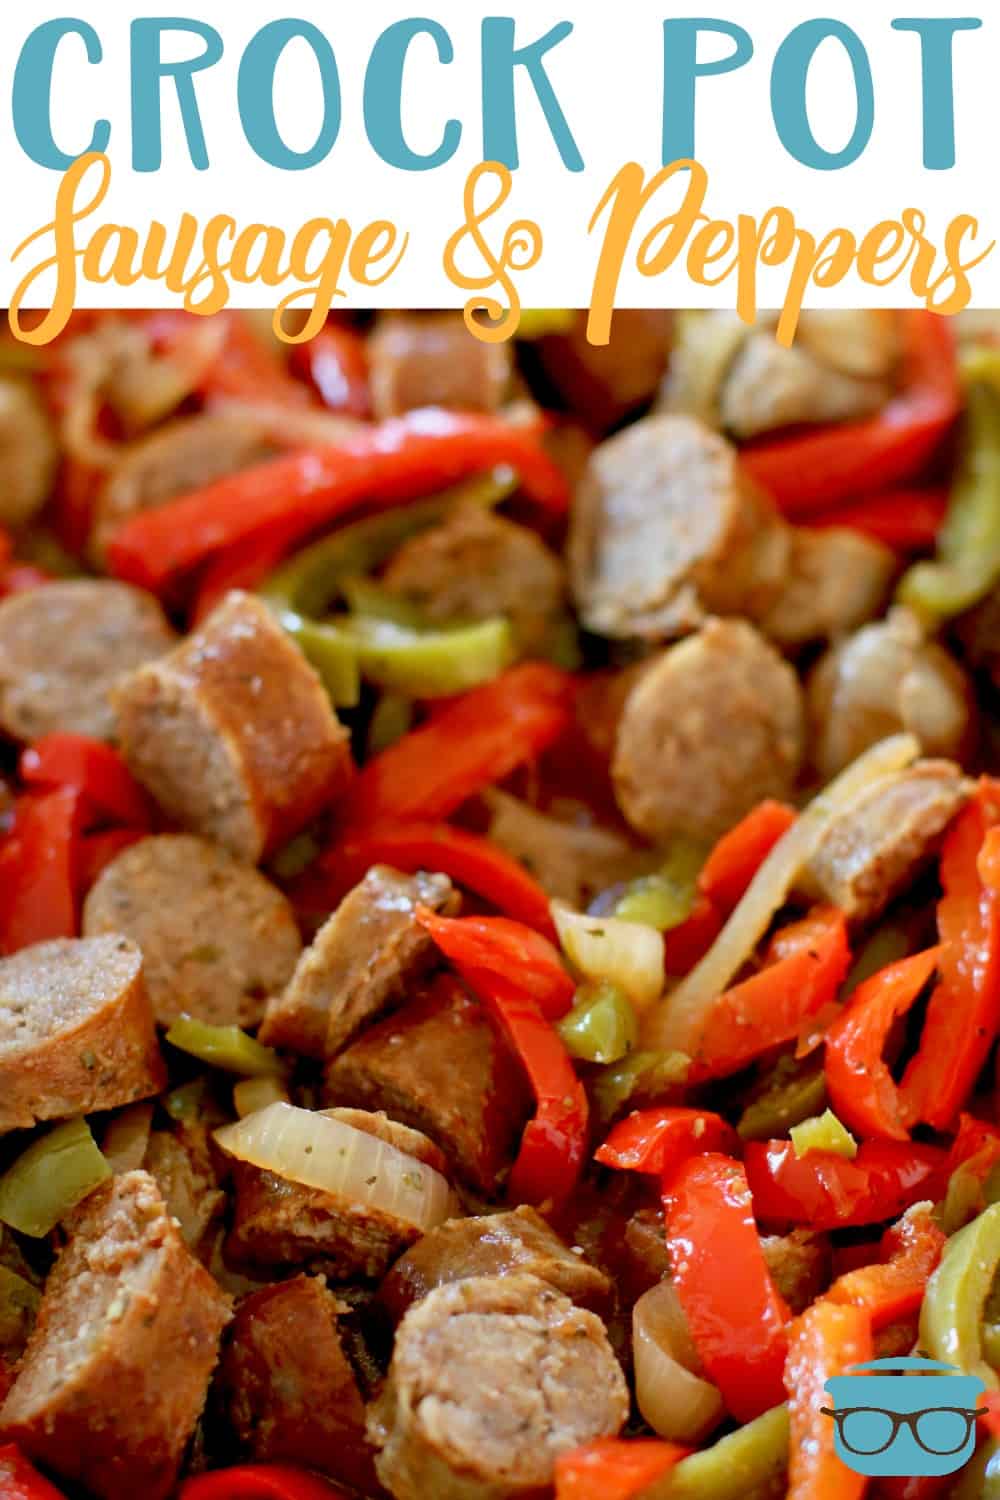 Crock Pot Sausage and Peppers recipe from The Country Cook